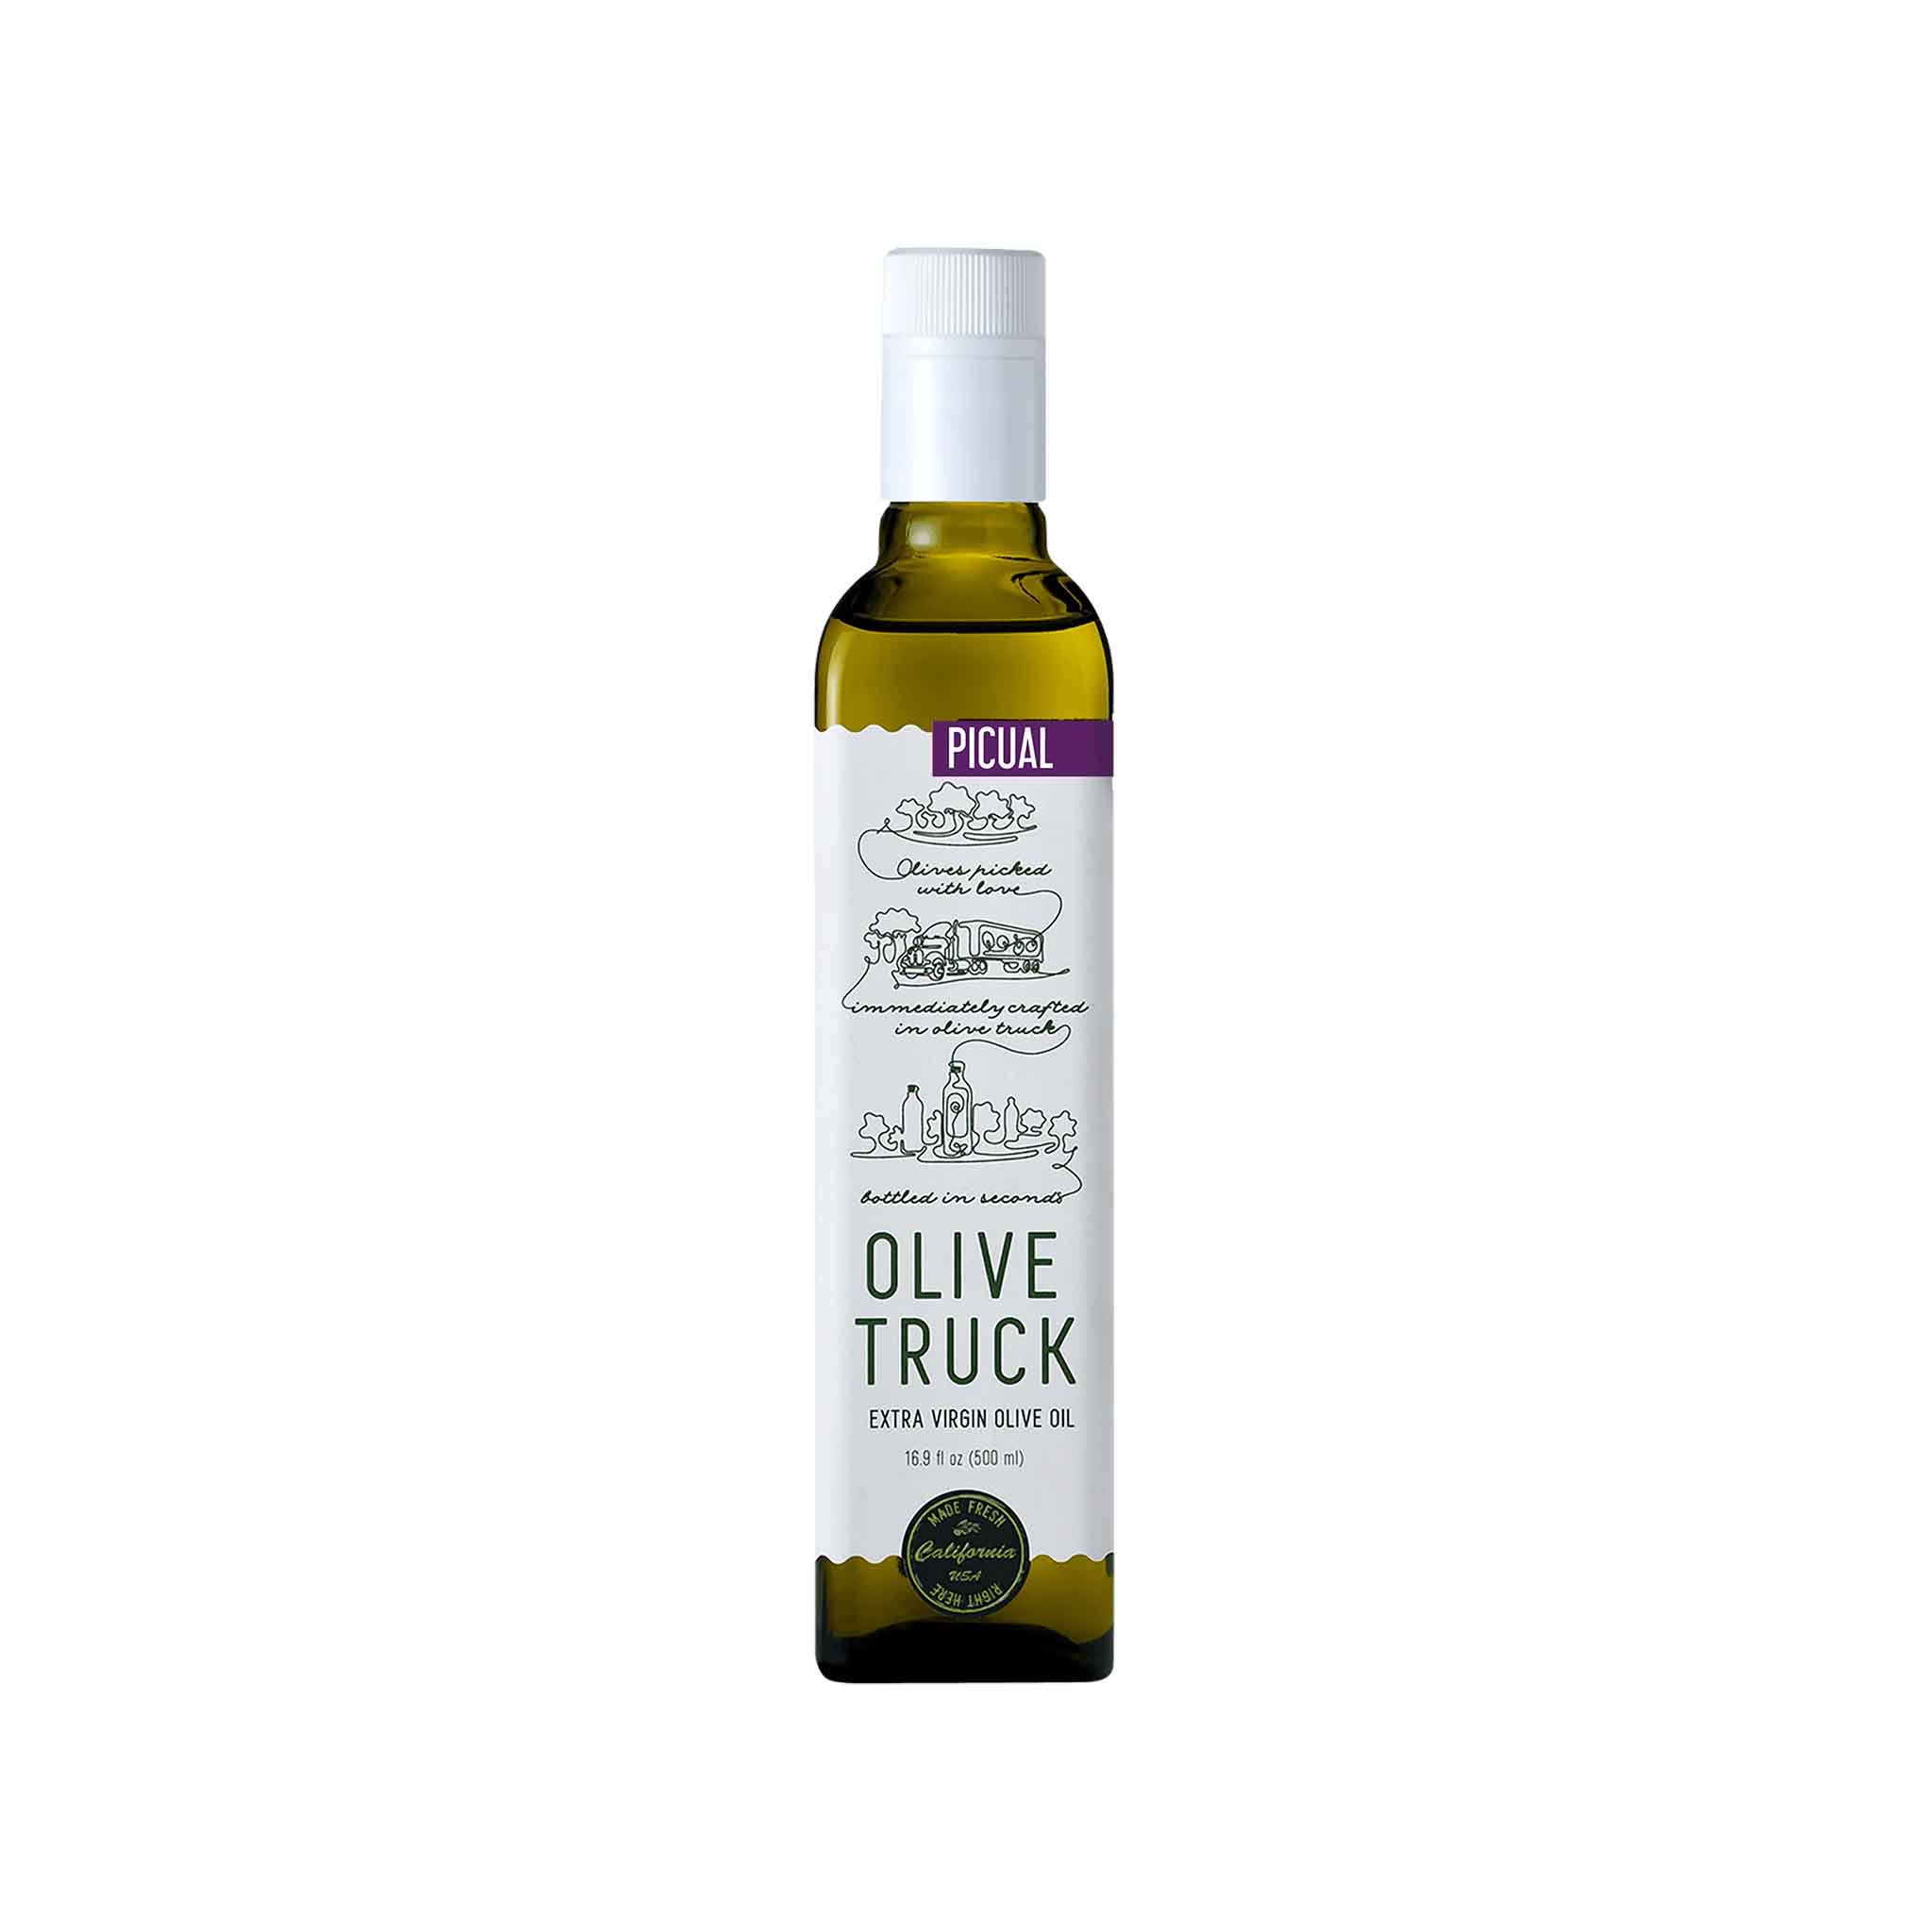 OLIVE TRUCK PICUAL EXTRA VIRGIN OLIVE OIL 16.9oz